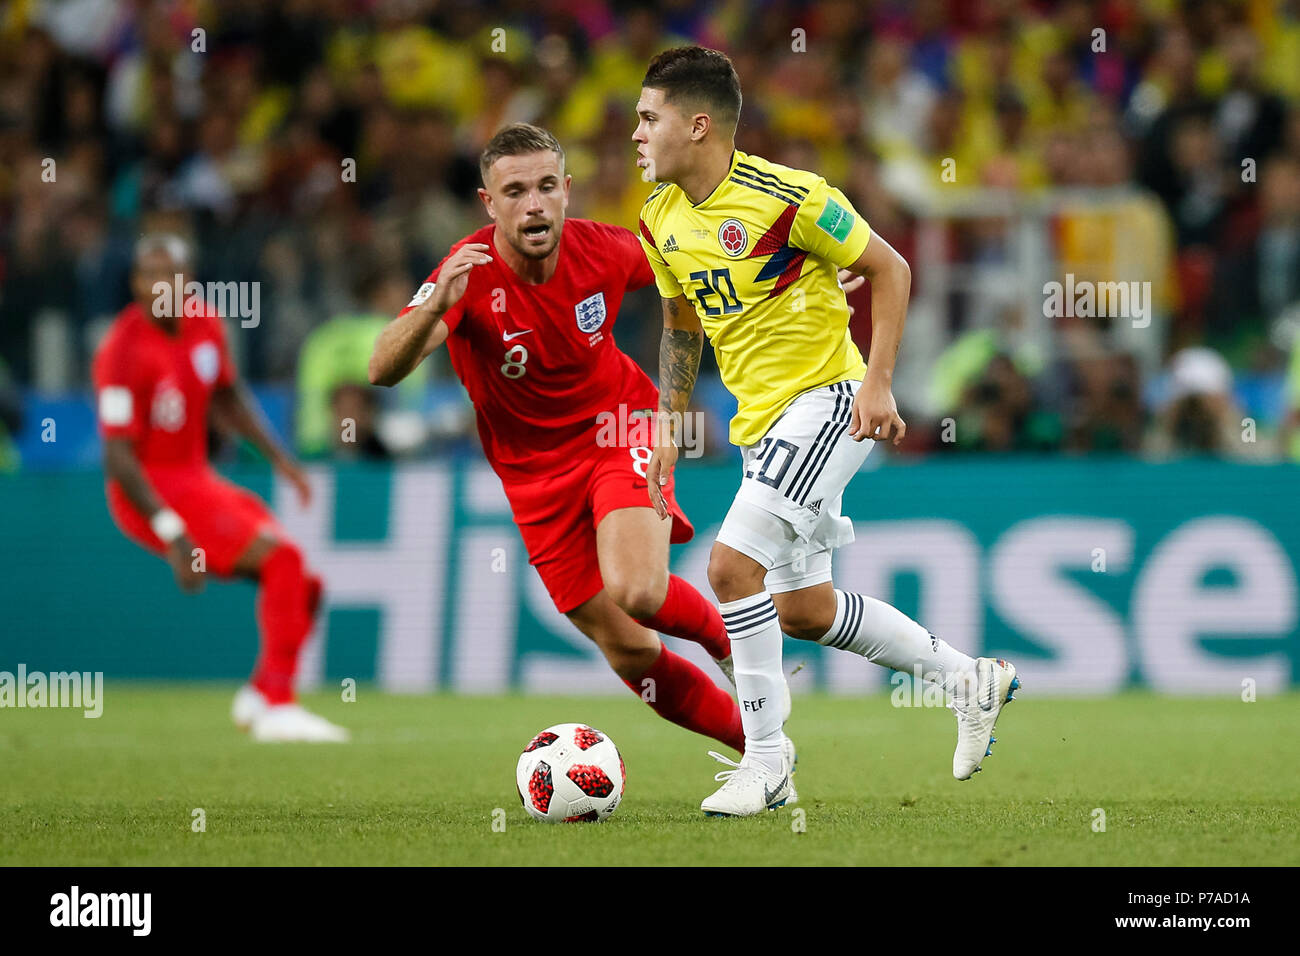 Moscow, Russia. 3rd July, 2018. Jordan Henderson of England and Juan Quintero of Colombia during the 2018 FIFA World Cup Round of 16 match between Colombia and England at Spartak Stadium on July 3rd 2018 in Moscow, Russia. (Photo by Daniel Chesterton/phcimages.com) Credit: PHC Images/Alamy Live News Stock Photo